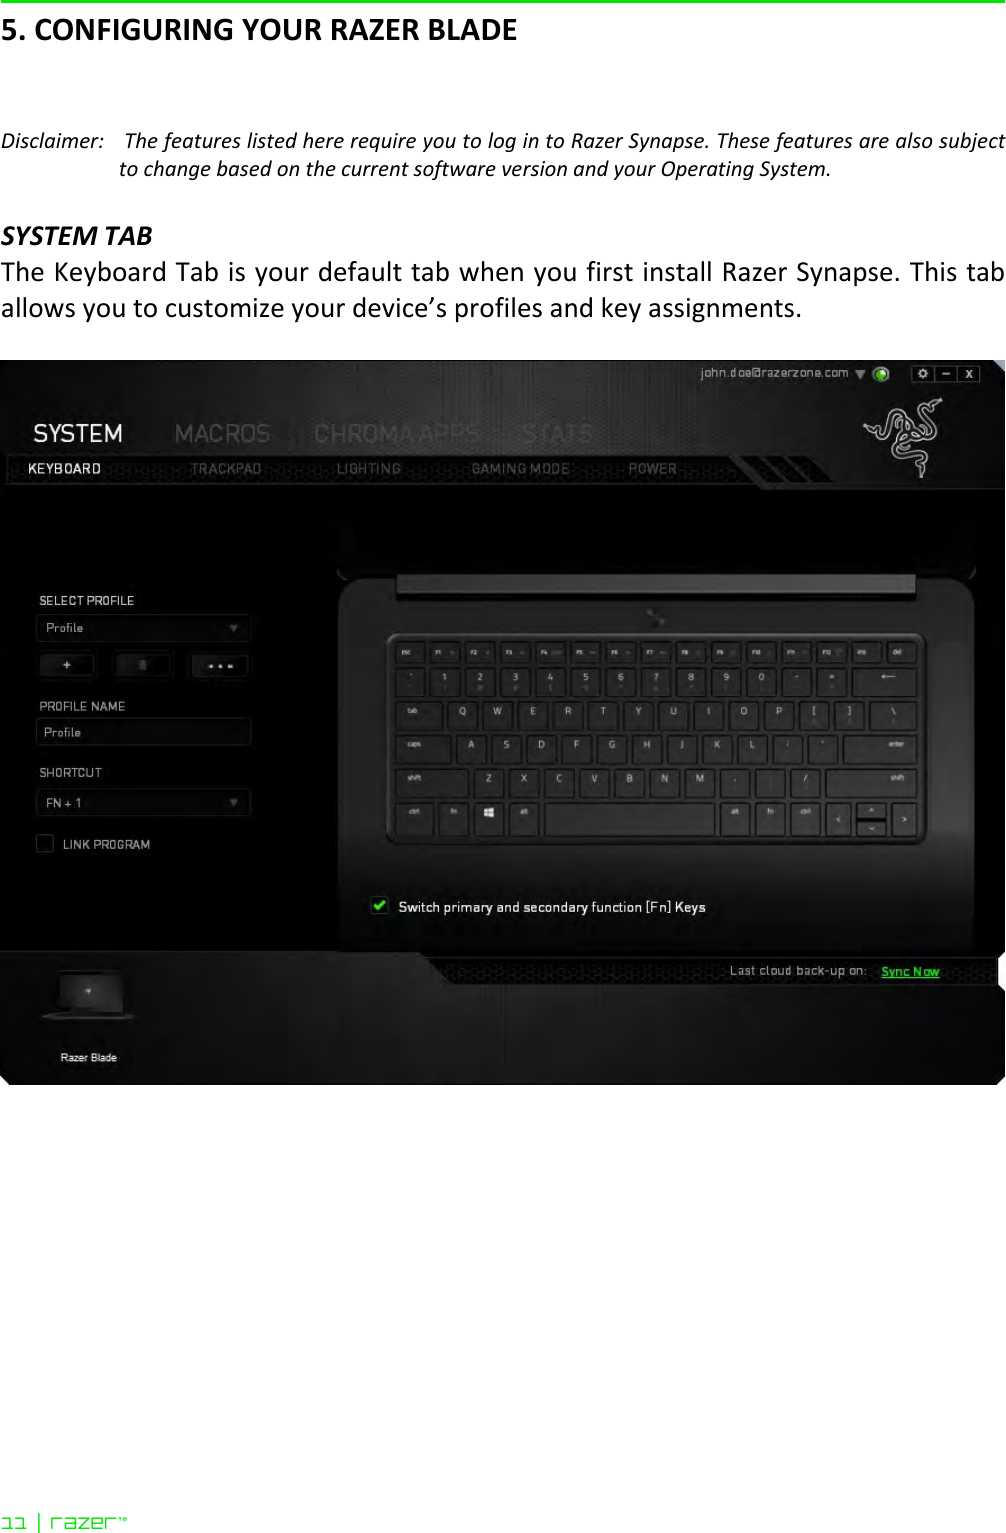 11 | razer™  5. CONFIGURING YOUR RAZER BLADE    Disclaimer:   The features listed here require you to log in to Razer Synapse. These features are also subject to change based on the current software version and your Operating System.  SYSTEM TAB The Keyboard Tab is your default tab when you first install Razer Synapse. This tab allows you to customize your device’s profiles and key assignments.    